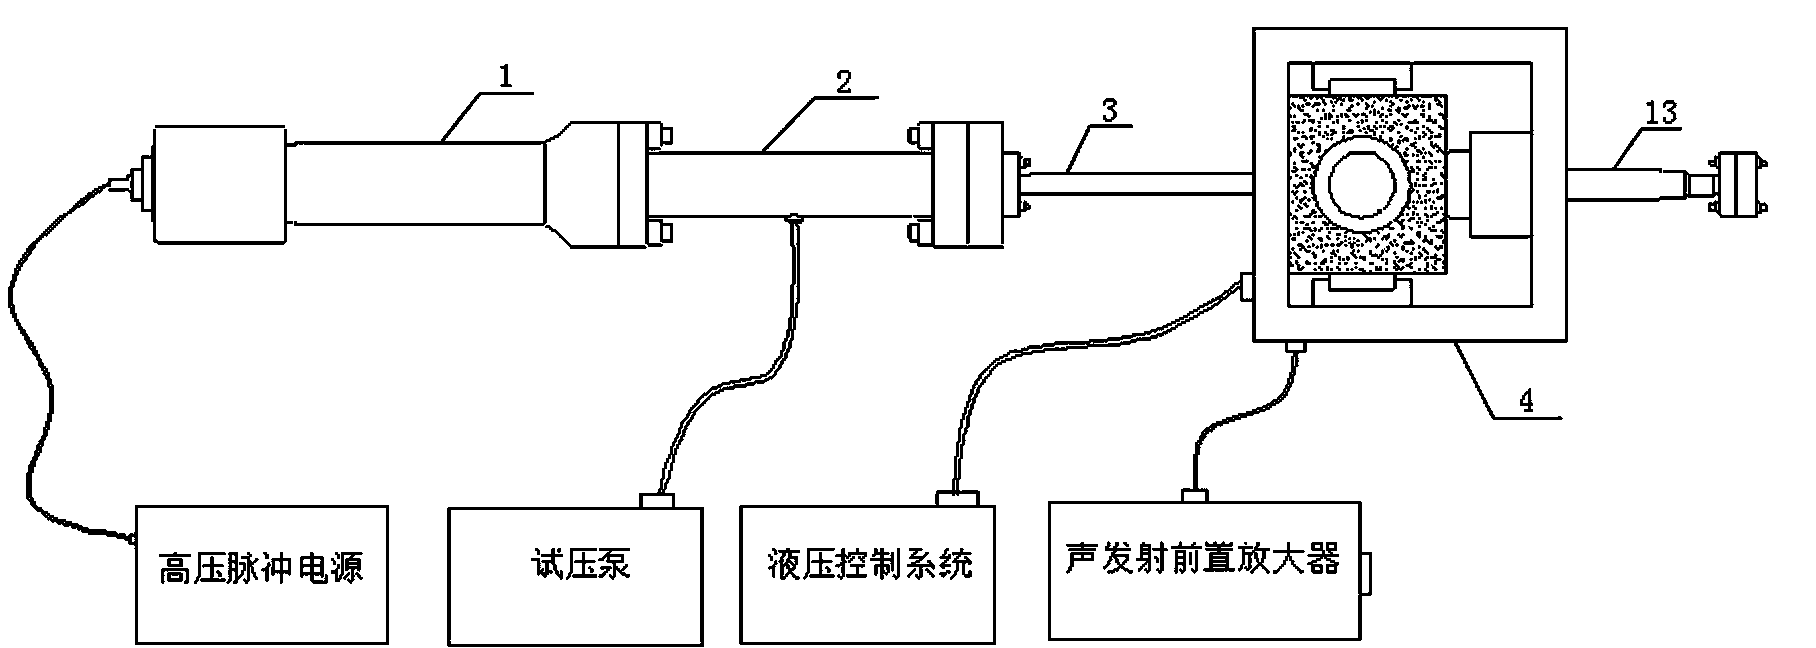 Coal seam anti-reflection experiment device based on high-voltage electric pulse